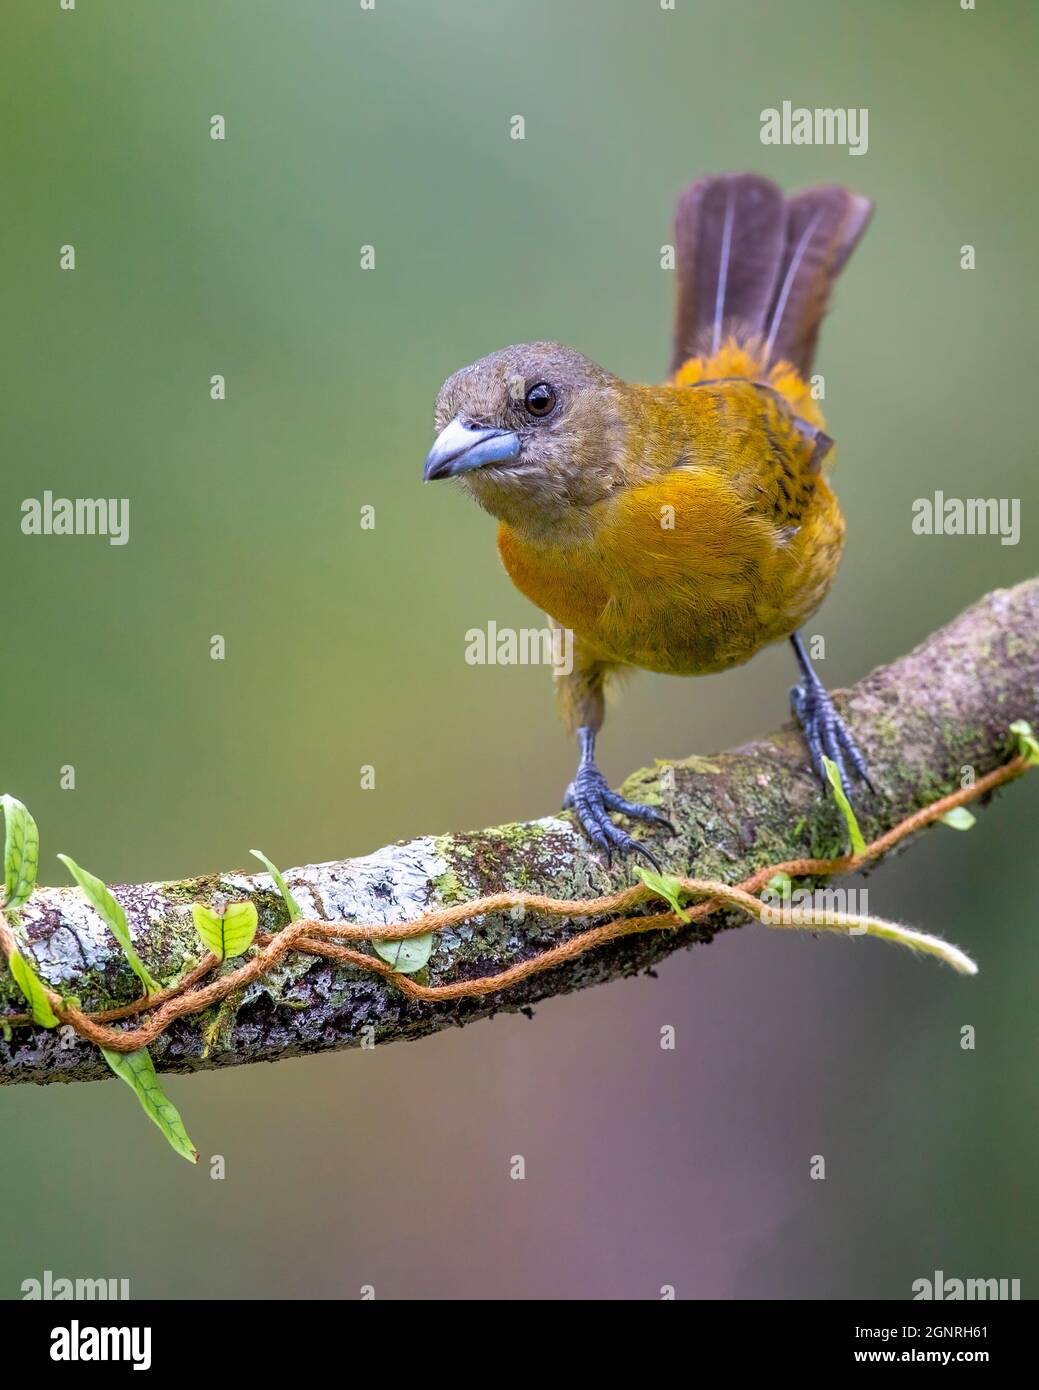 Female Passerini's Tanager also called Scarlet-rumped Tanager (Ramphocelus passerinii) perched on a branch in a Costa Rican rainforest. Stock Photo